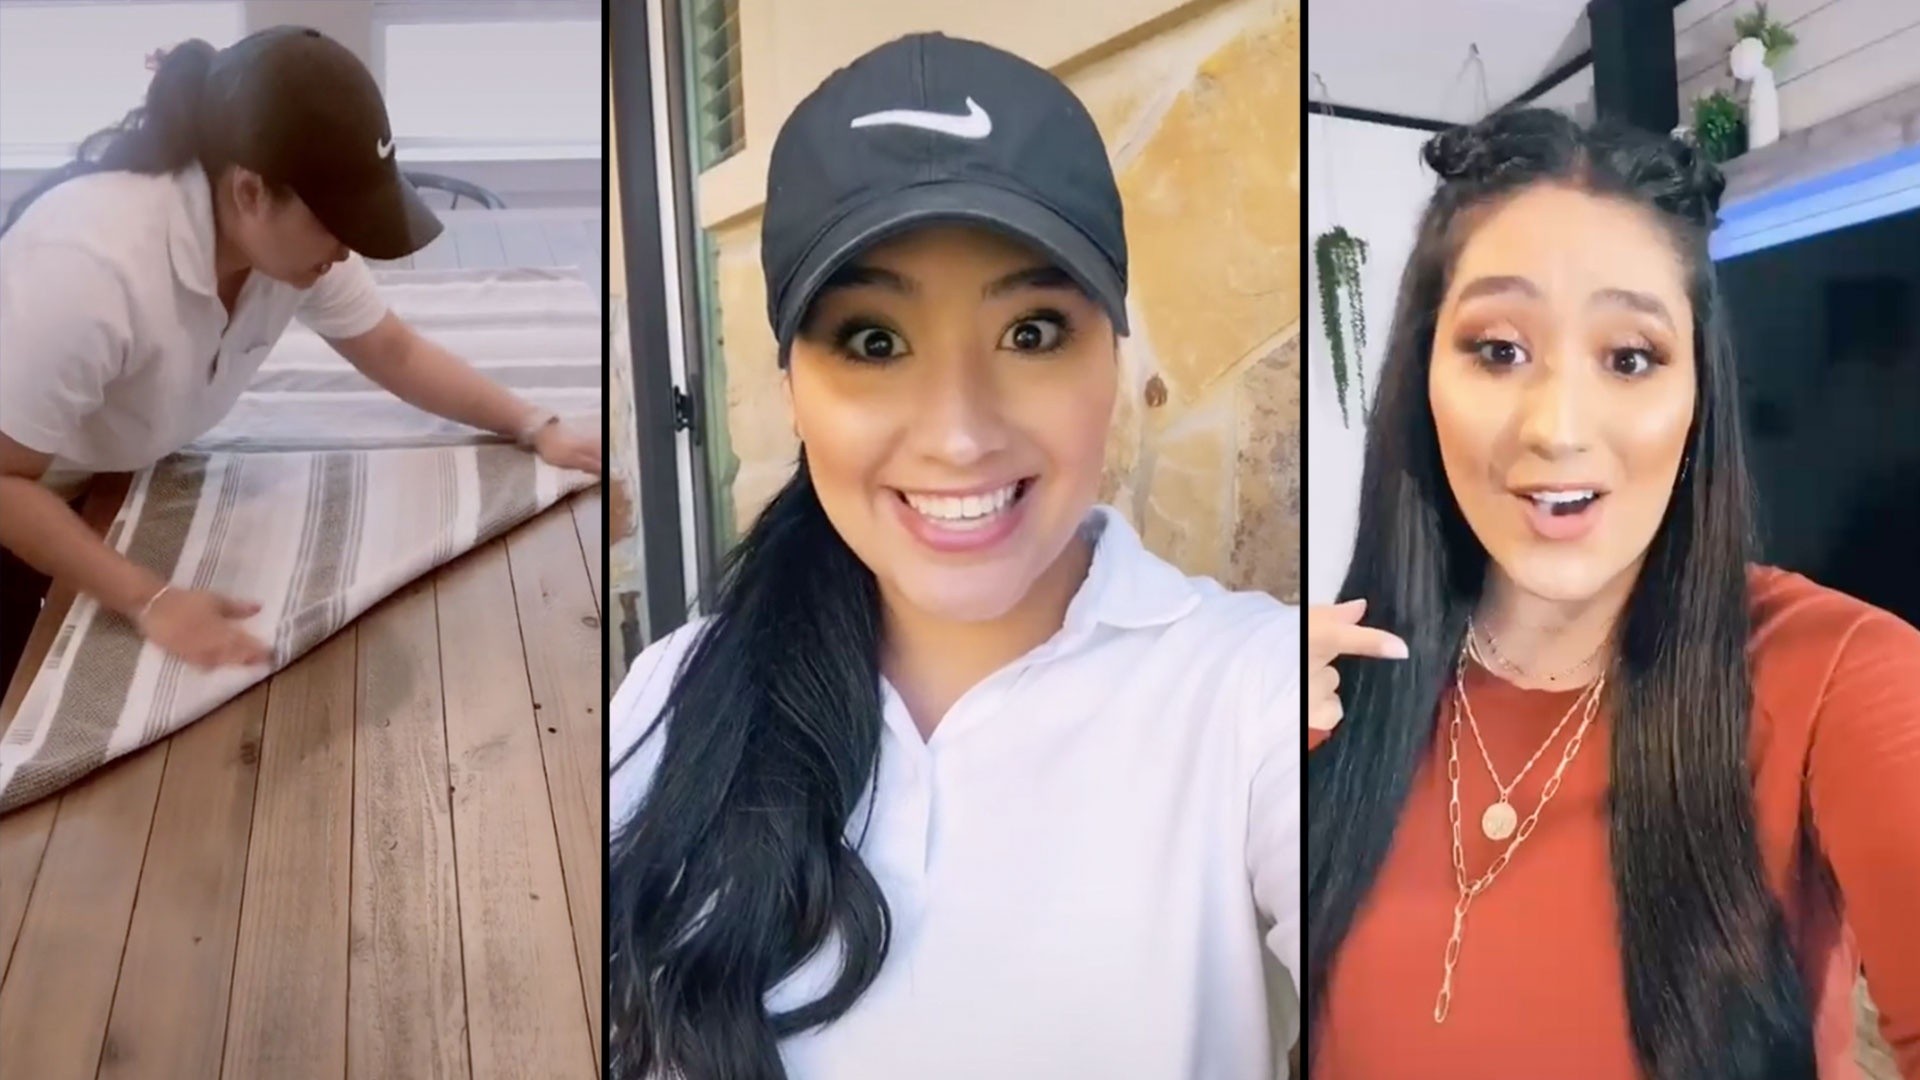 Texas woman goes viral on TikTok for oddly satisfying cleaning videos